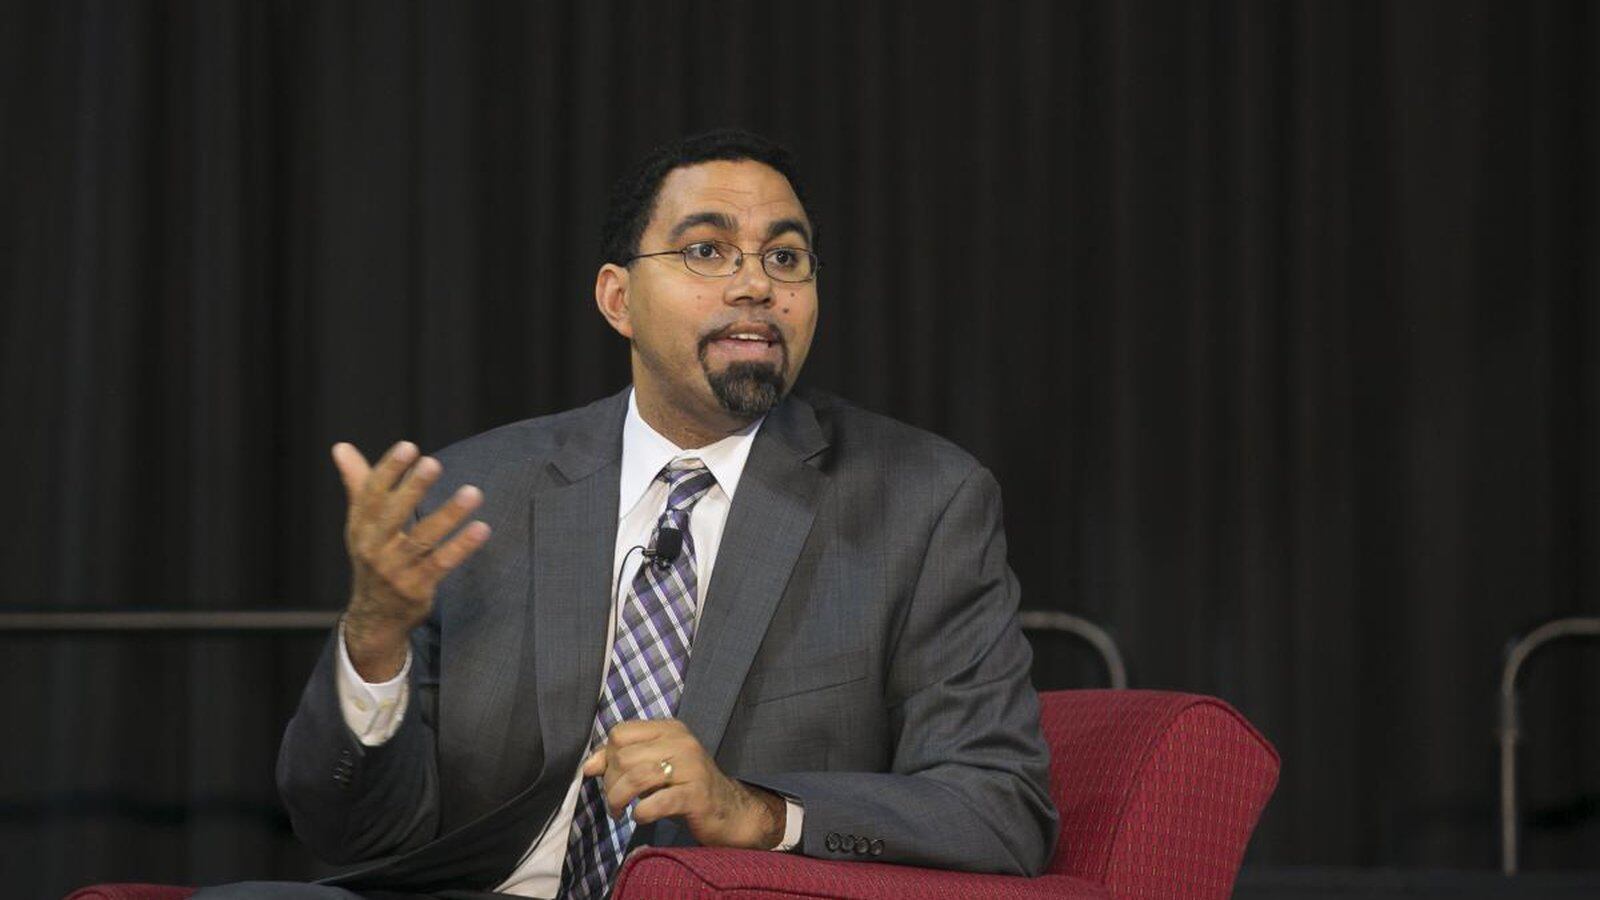 John King, former New York education commissioner (and U.S. secretary of education) and current president and CEO of The Education Trust.